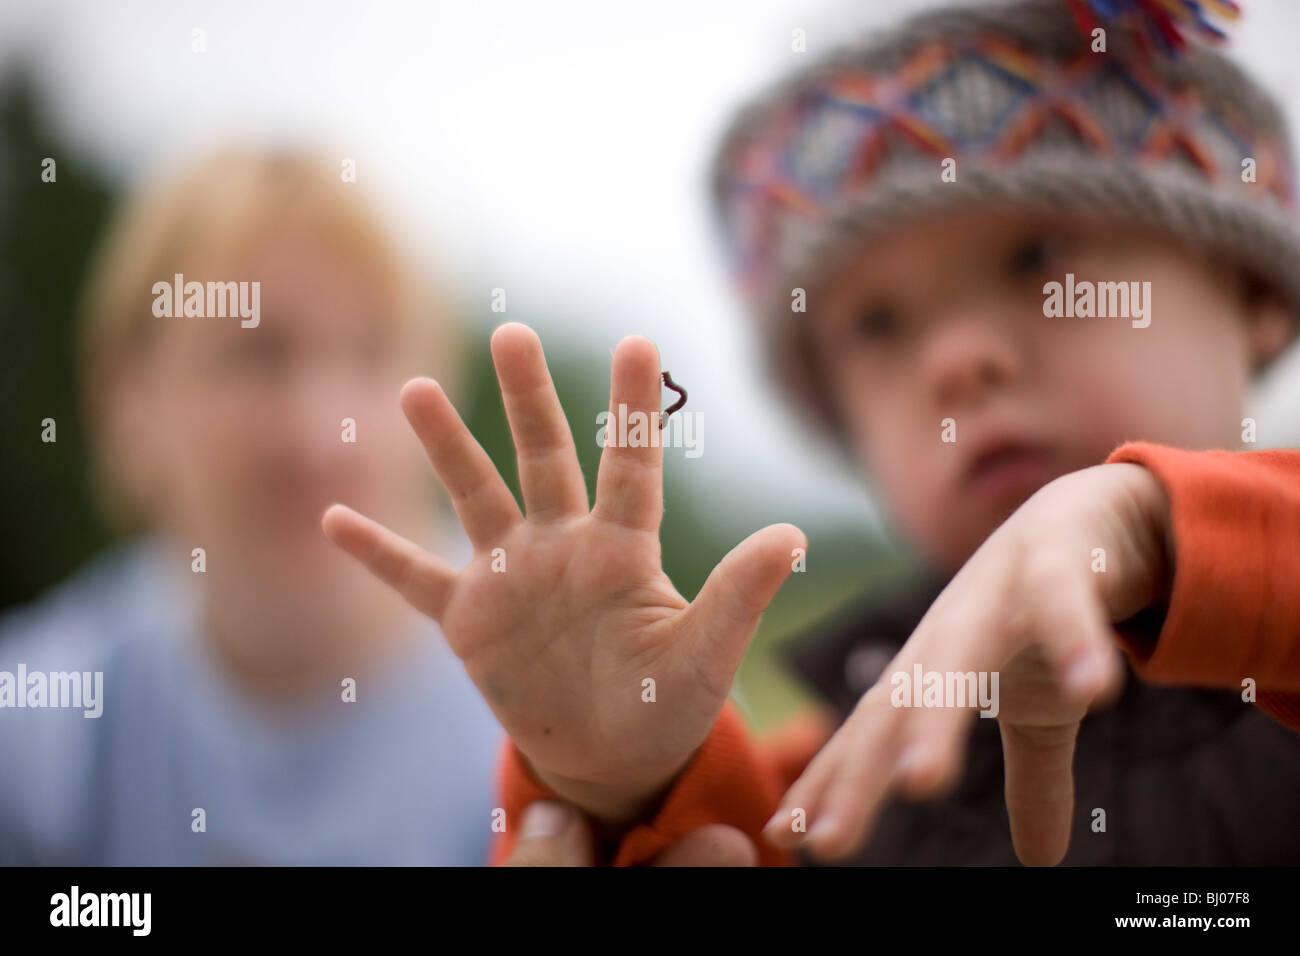 Young boy looking at an inchworm crawling on his hand. Stock Photo